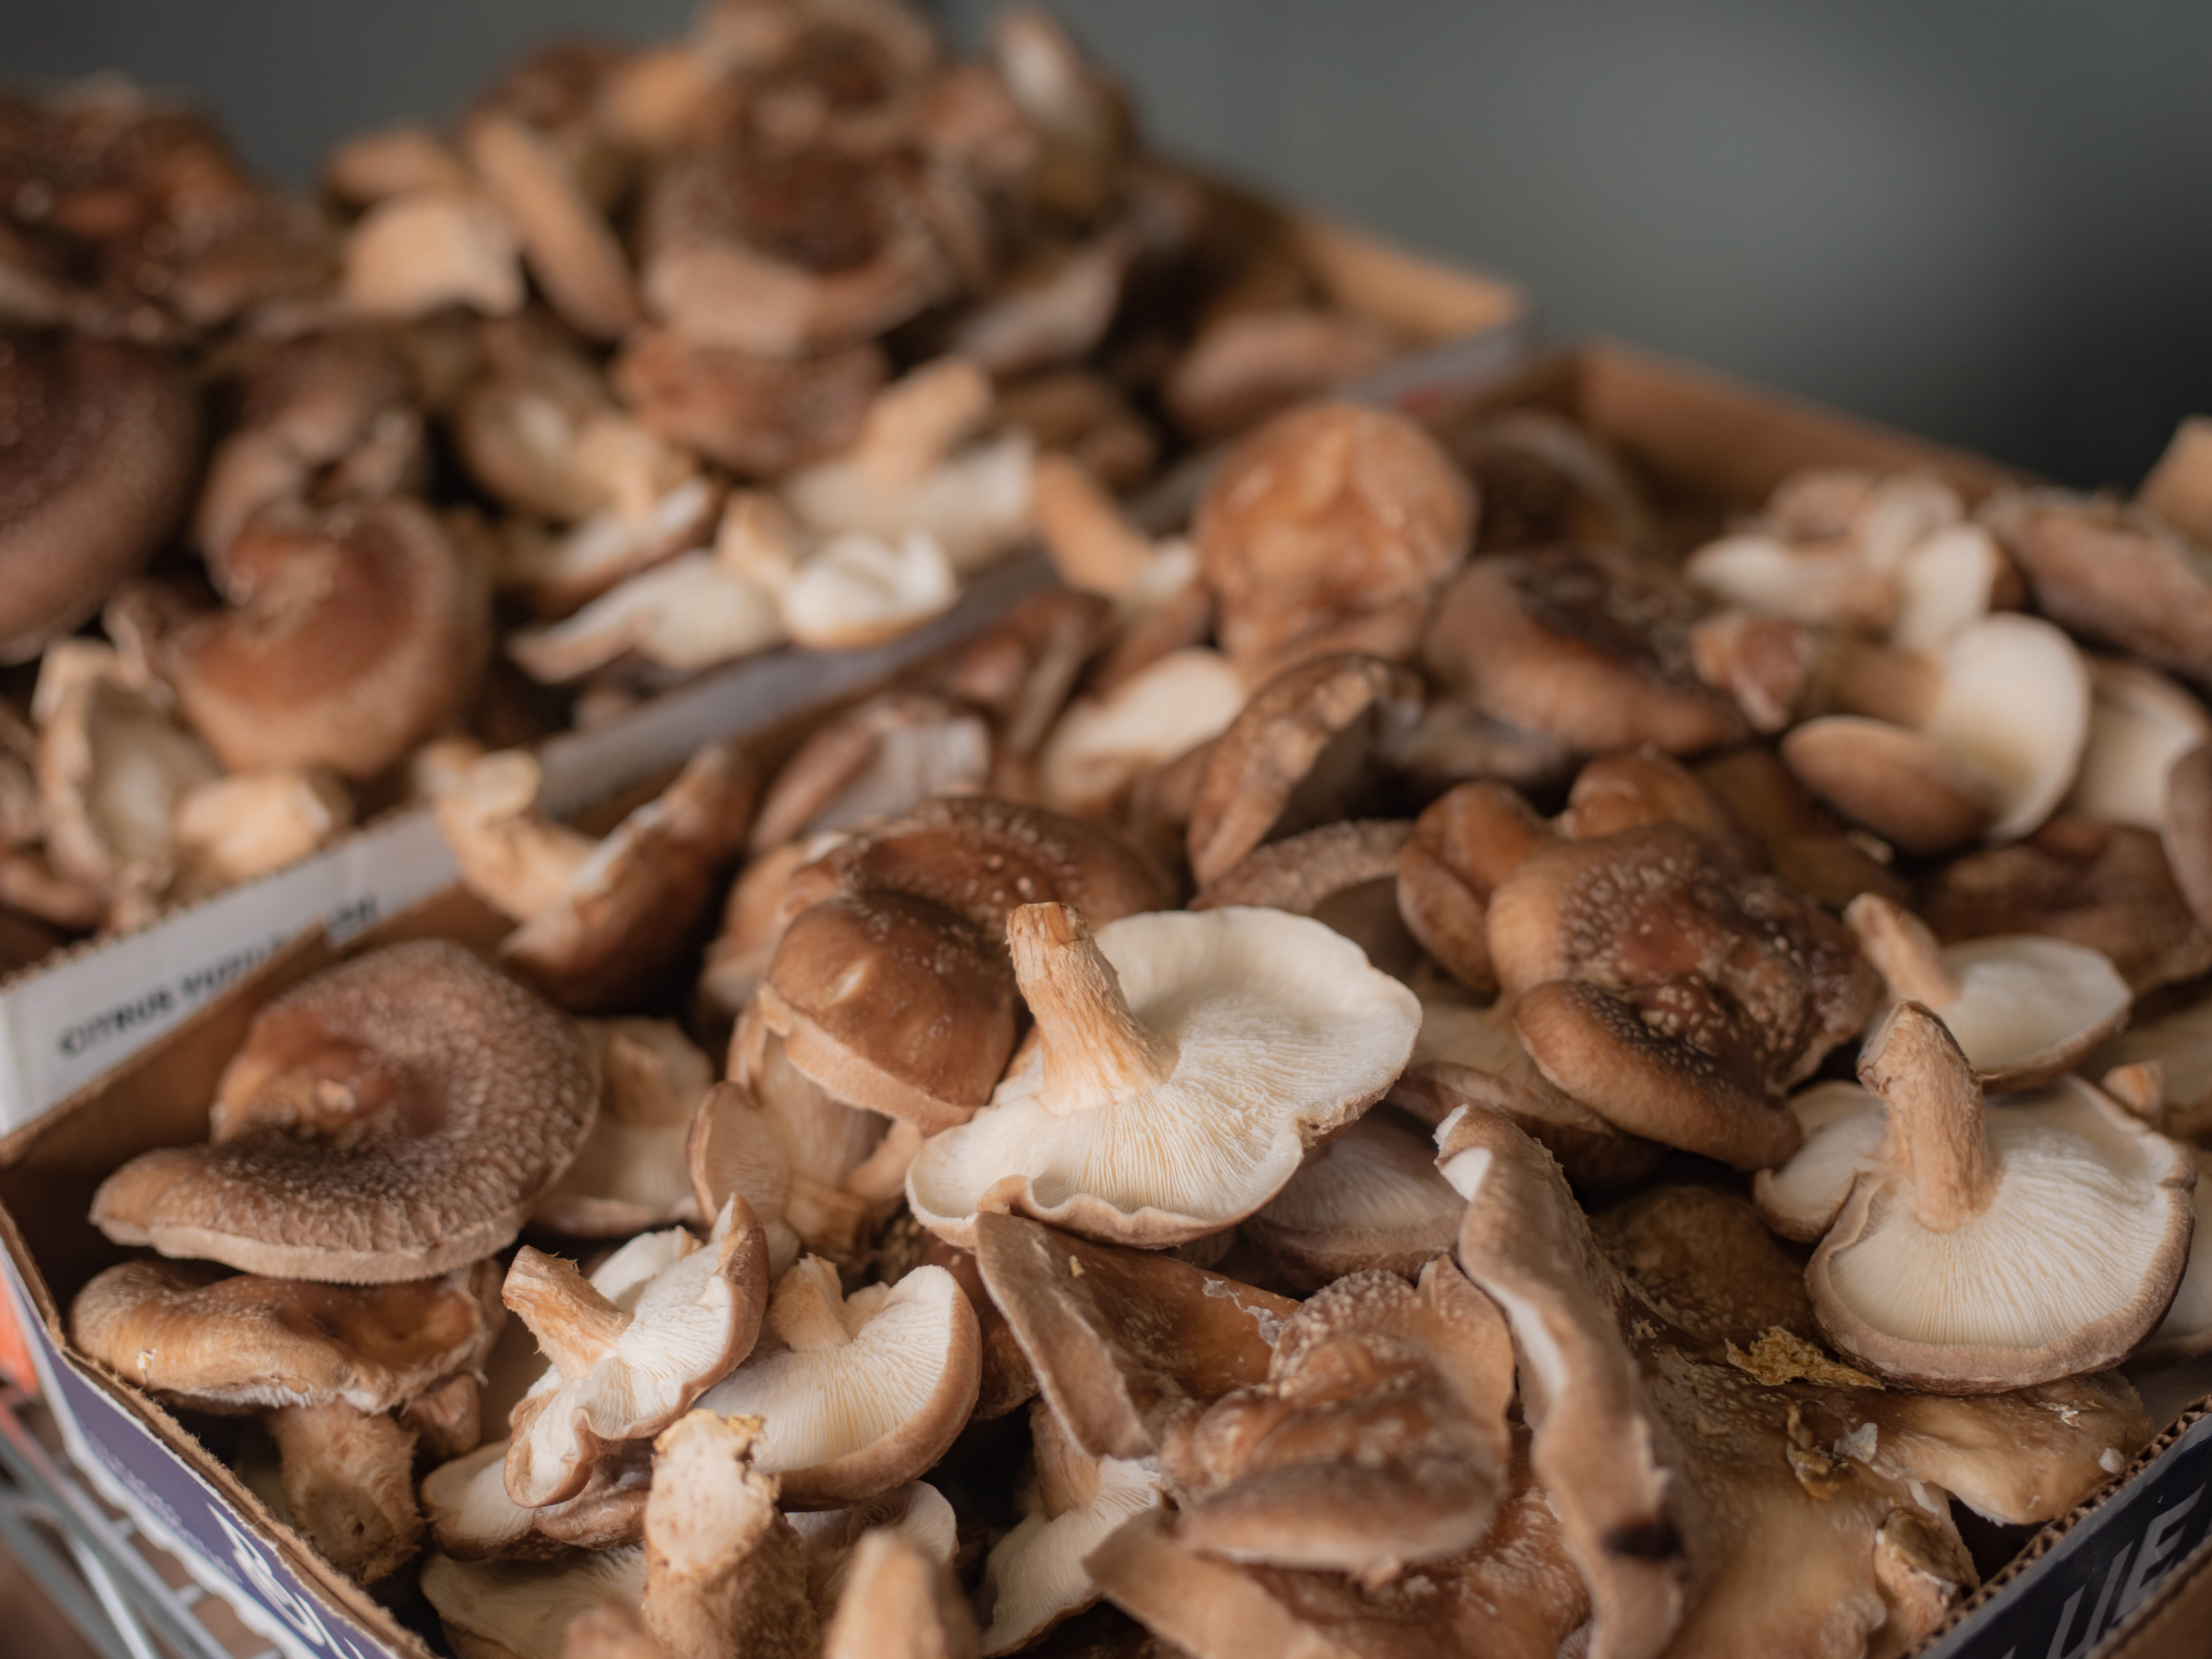 DESCANSO, CA - January 9, 2023: Close up of Shiitake mushrooms at Muellers Mushrooms in Descanso, CA. (Alan Nakkash / For The Times)